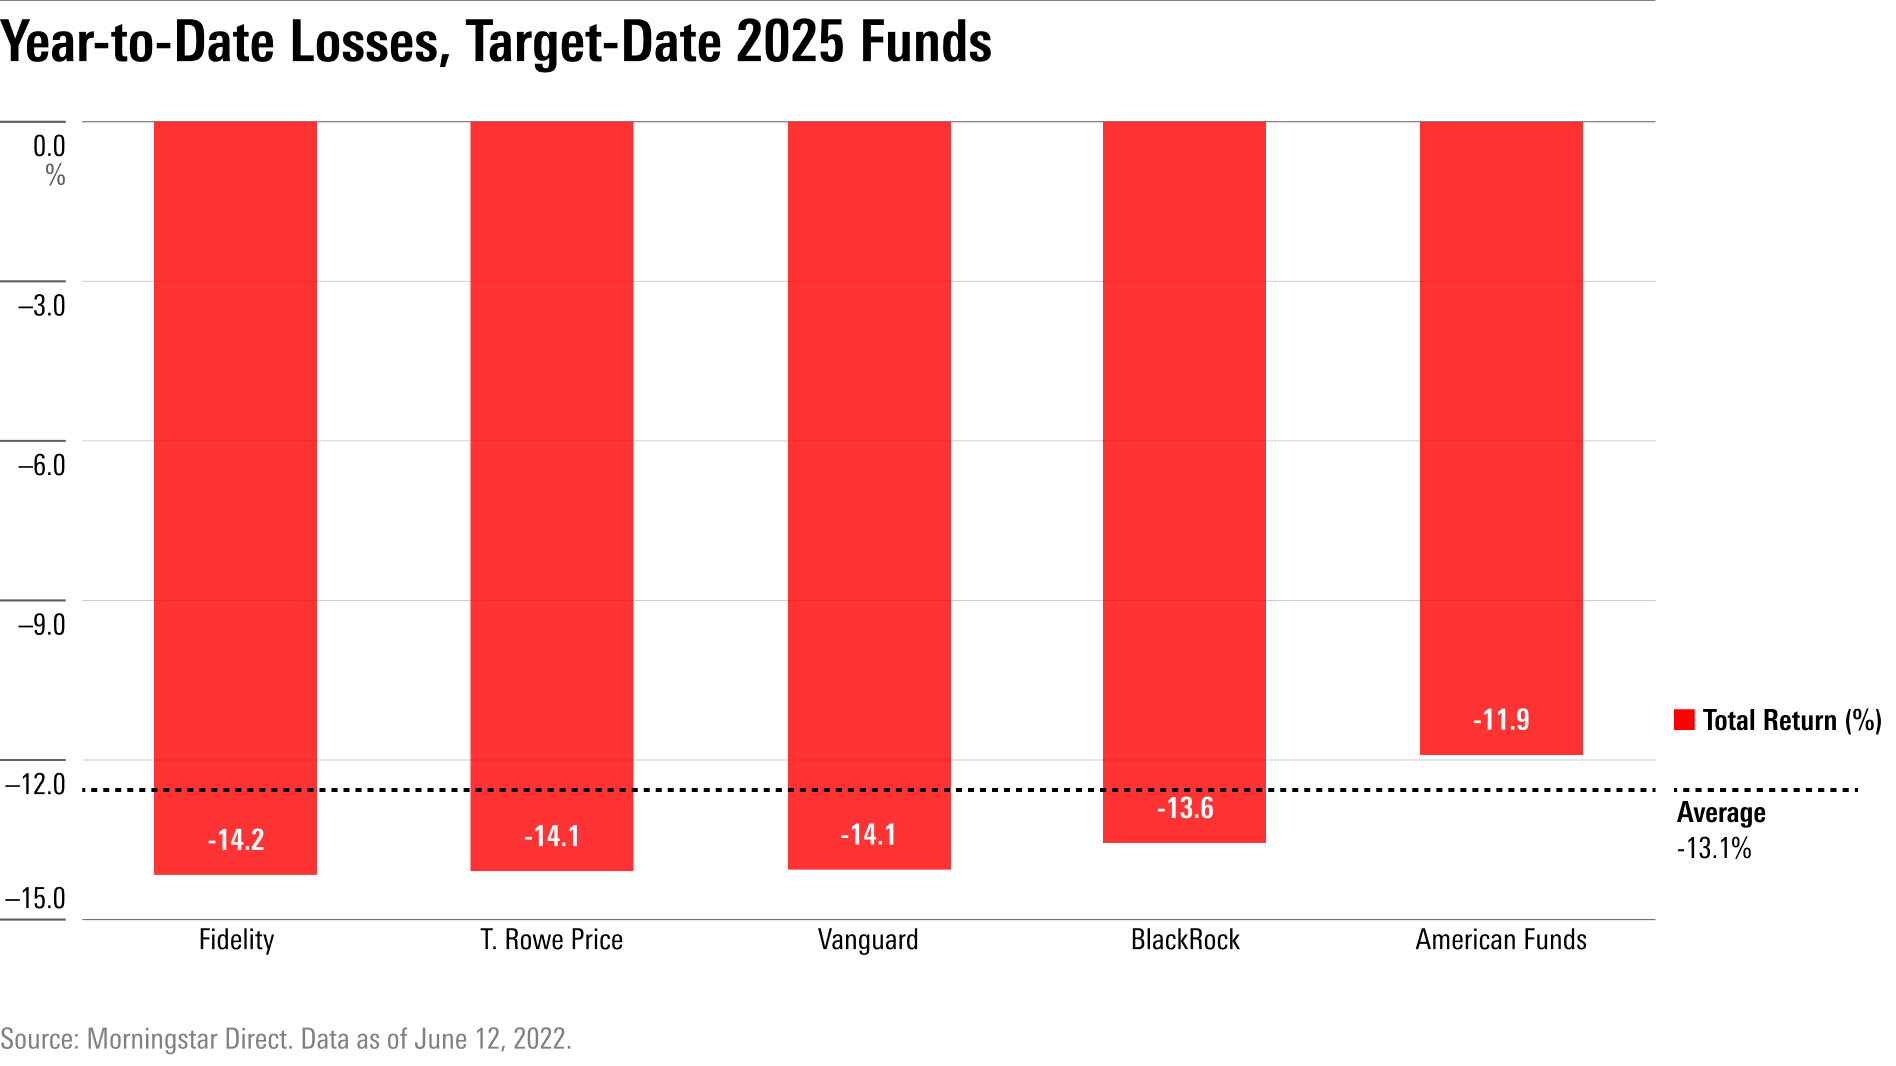 The year-to-date performances of the five largest target-date 2025 funds